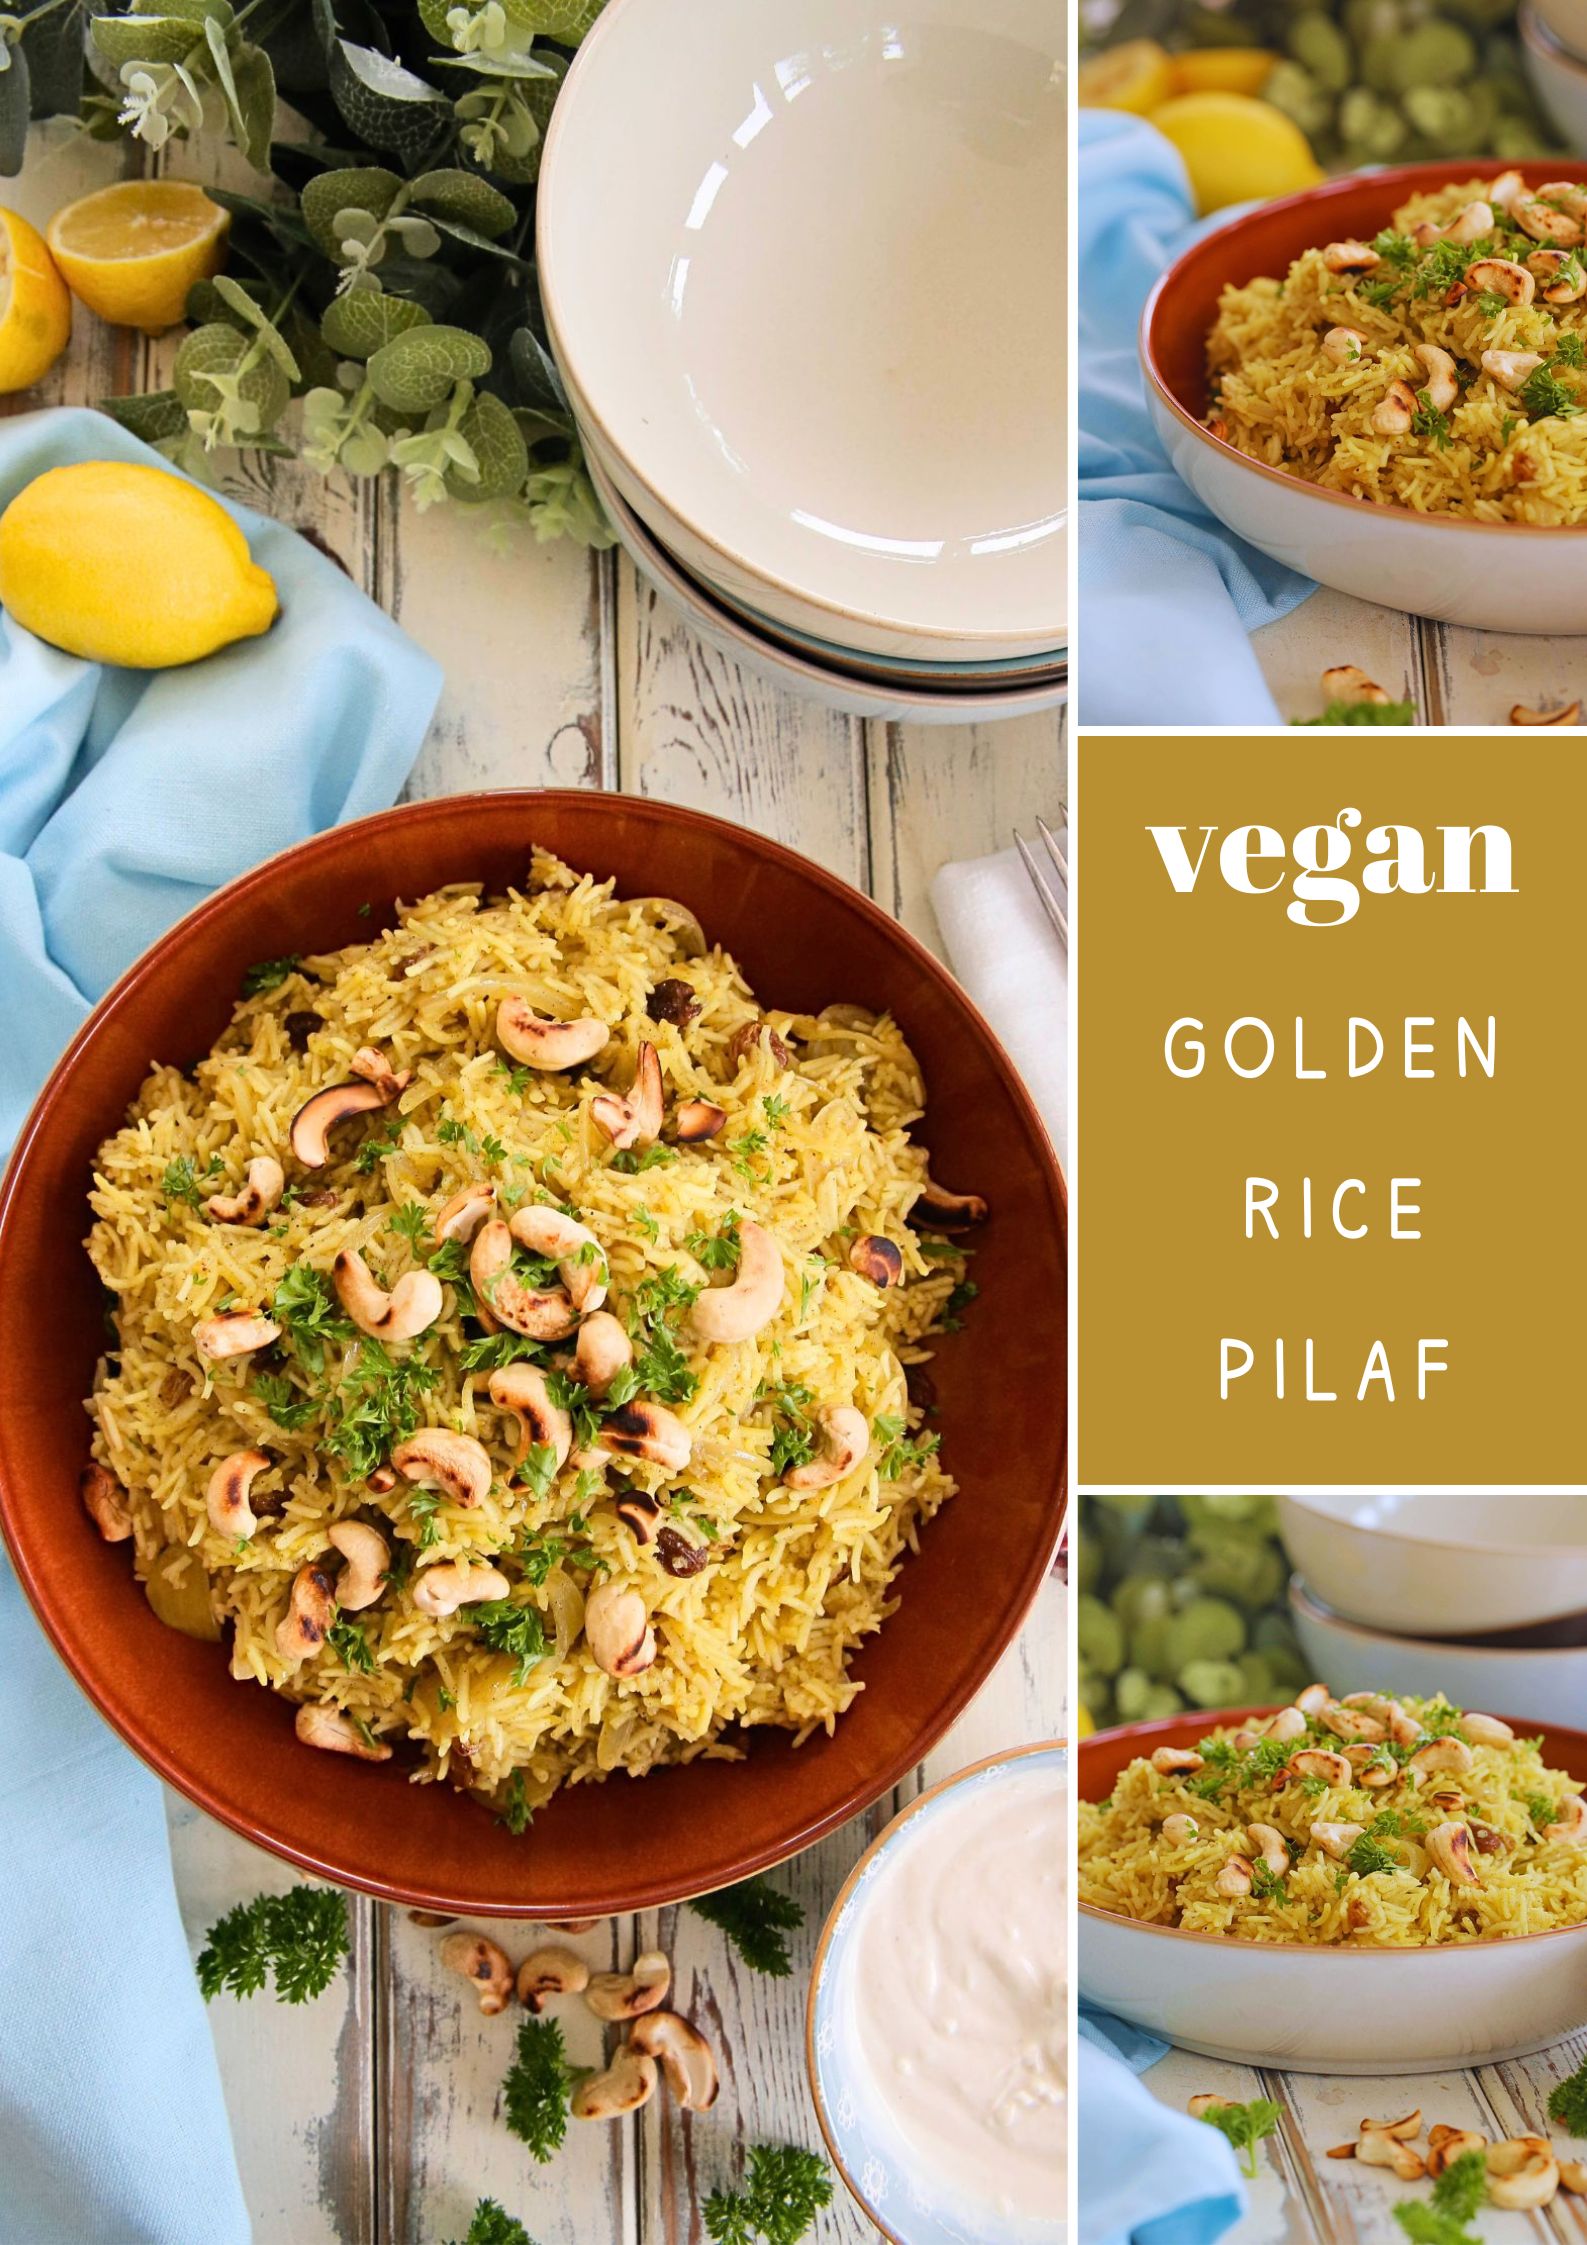 Made with simple ingredients this golden rice pilaf is a vibrant and flavourful side or main dish. It's also easy to make and all cooked in one pan for a quick and healthy vegan weeknight meal. Recipe on thecookandhim.com | #pilaf #ricerecipes #ricedishes #indianfood #veganrecipes #veganmeal